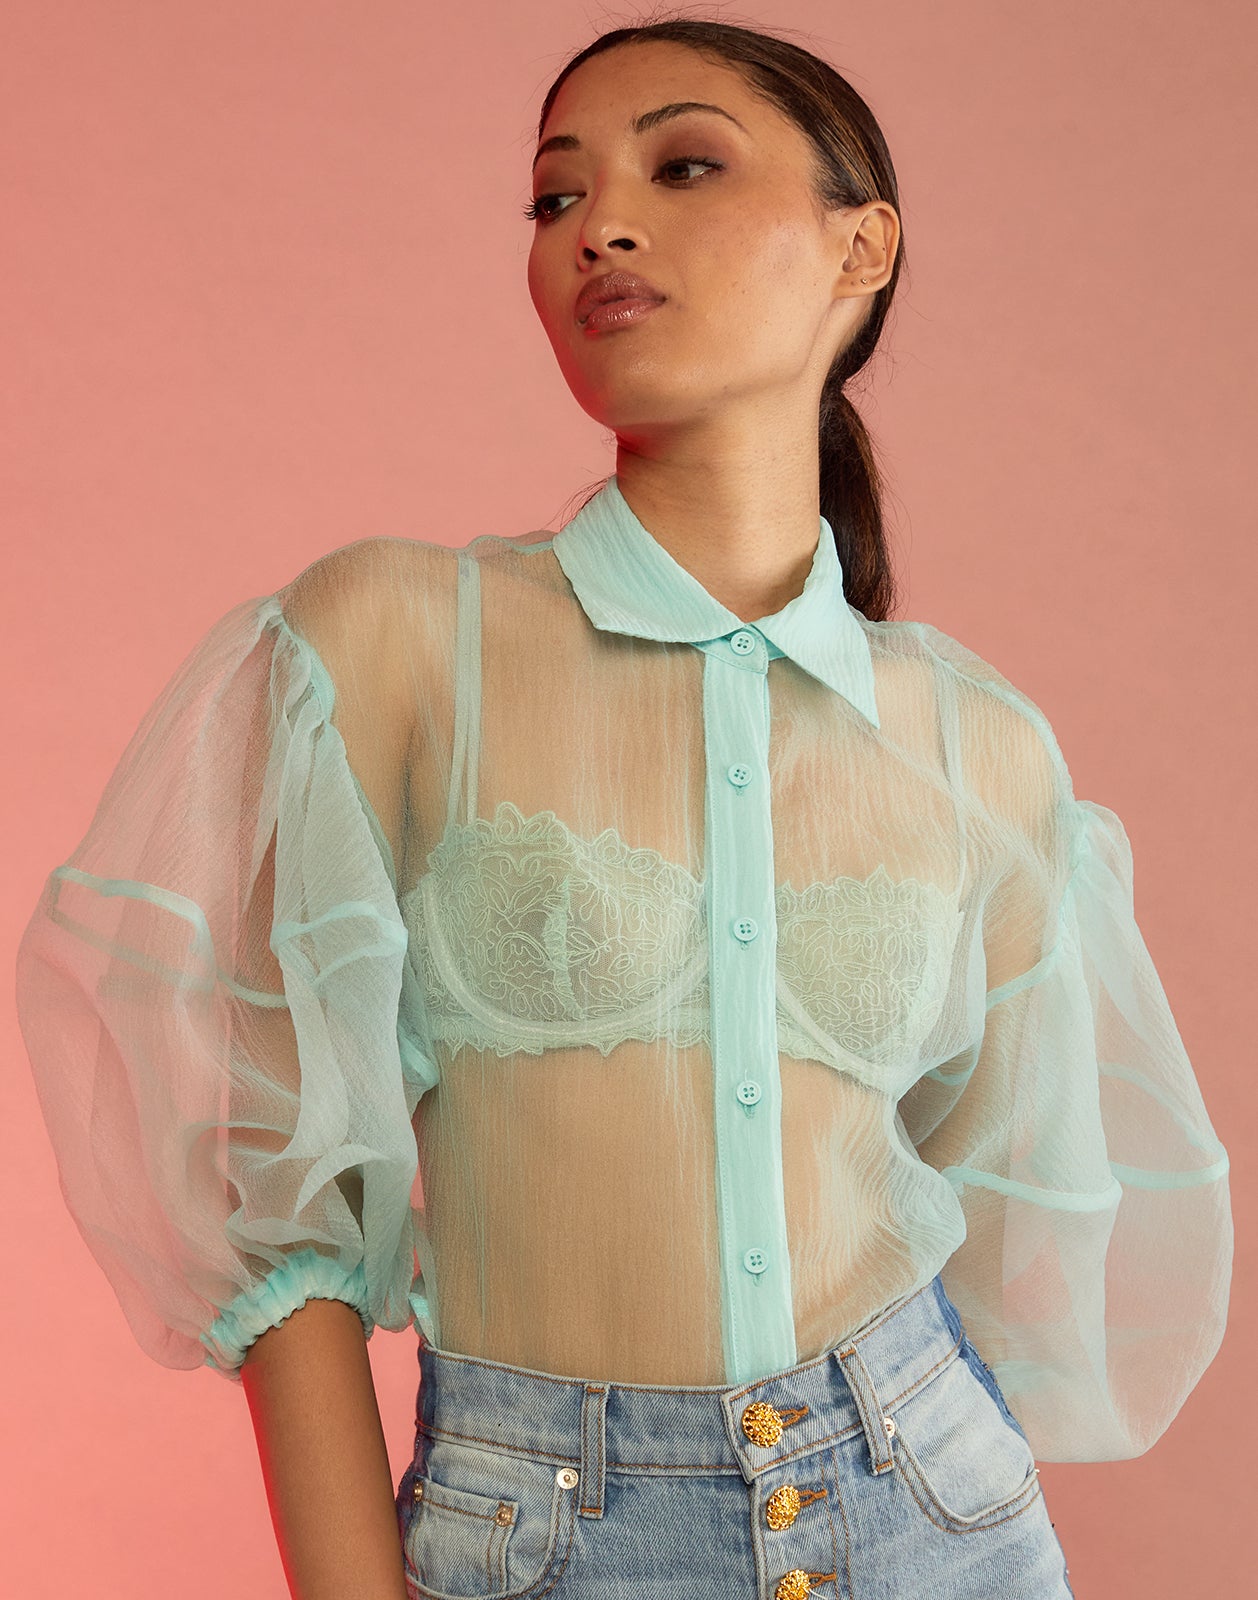 chris burritt recommends See Through Blouses Images